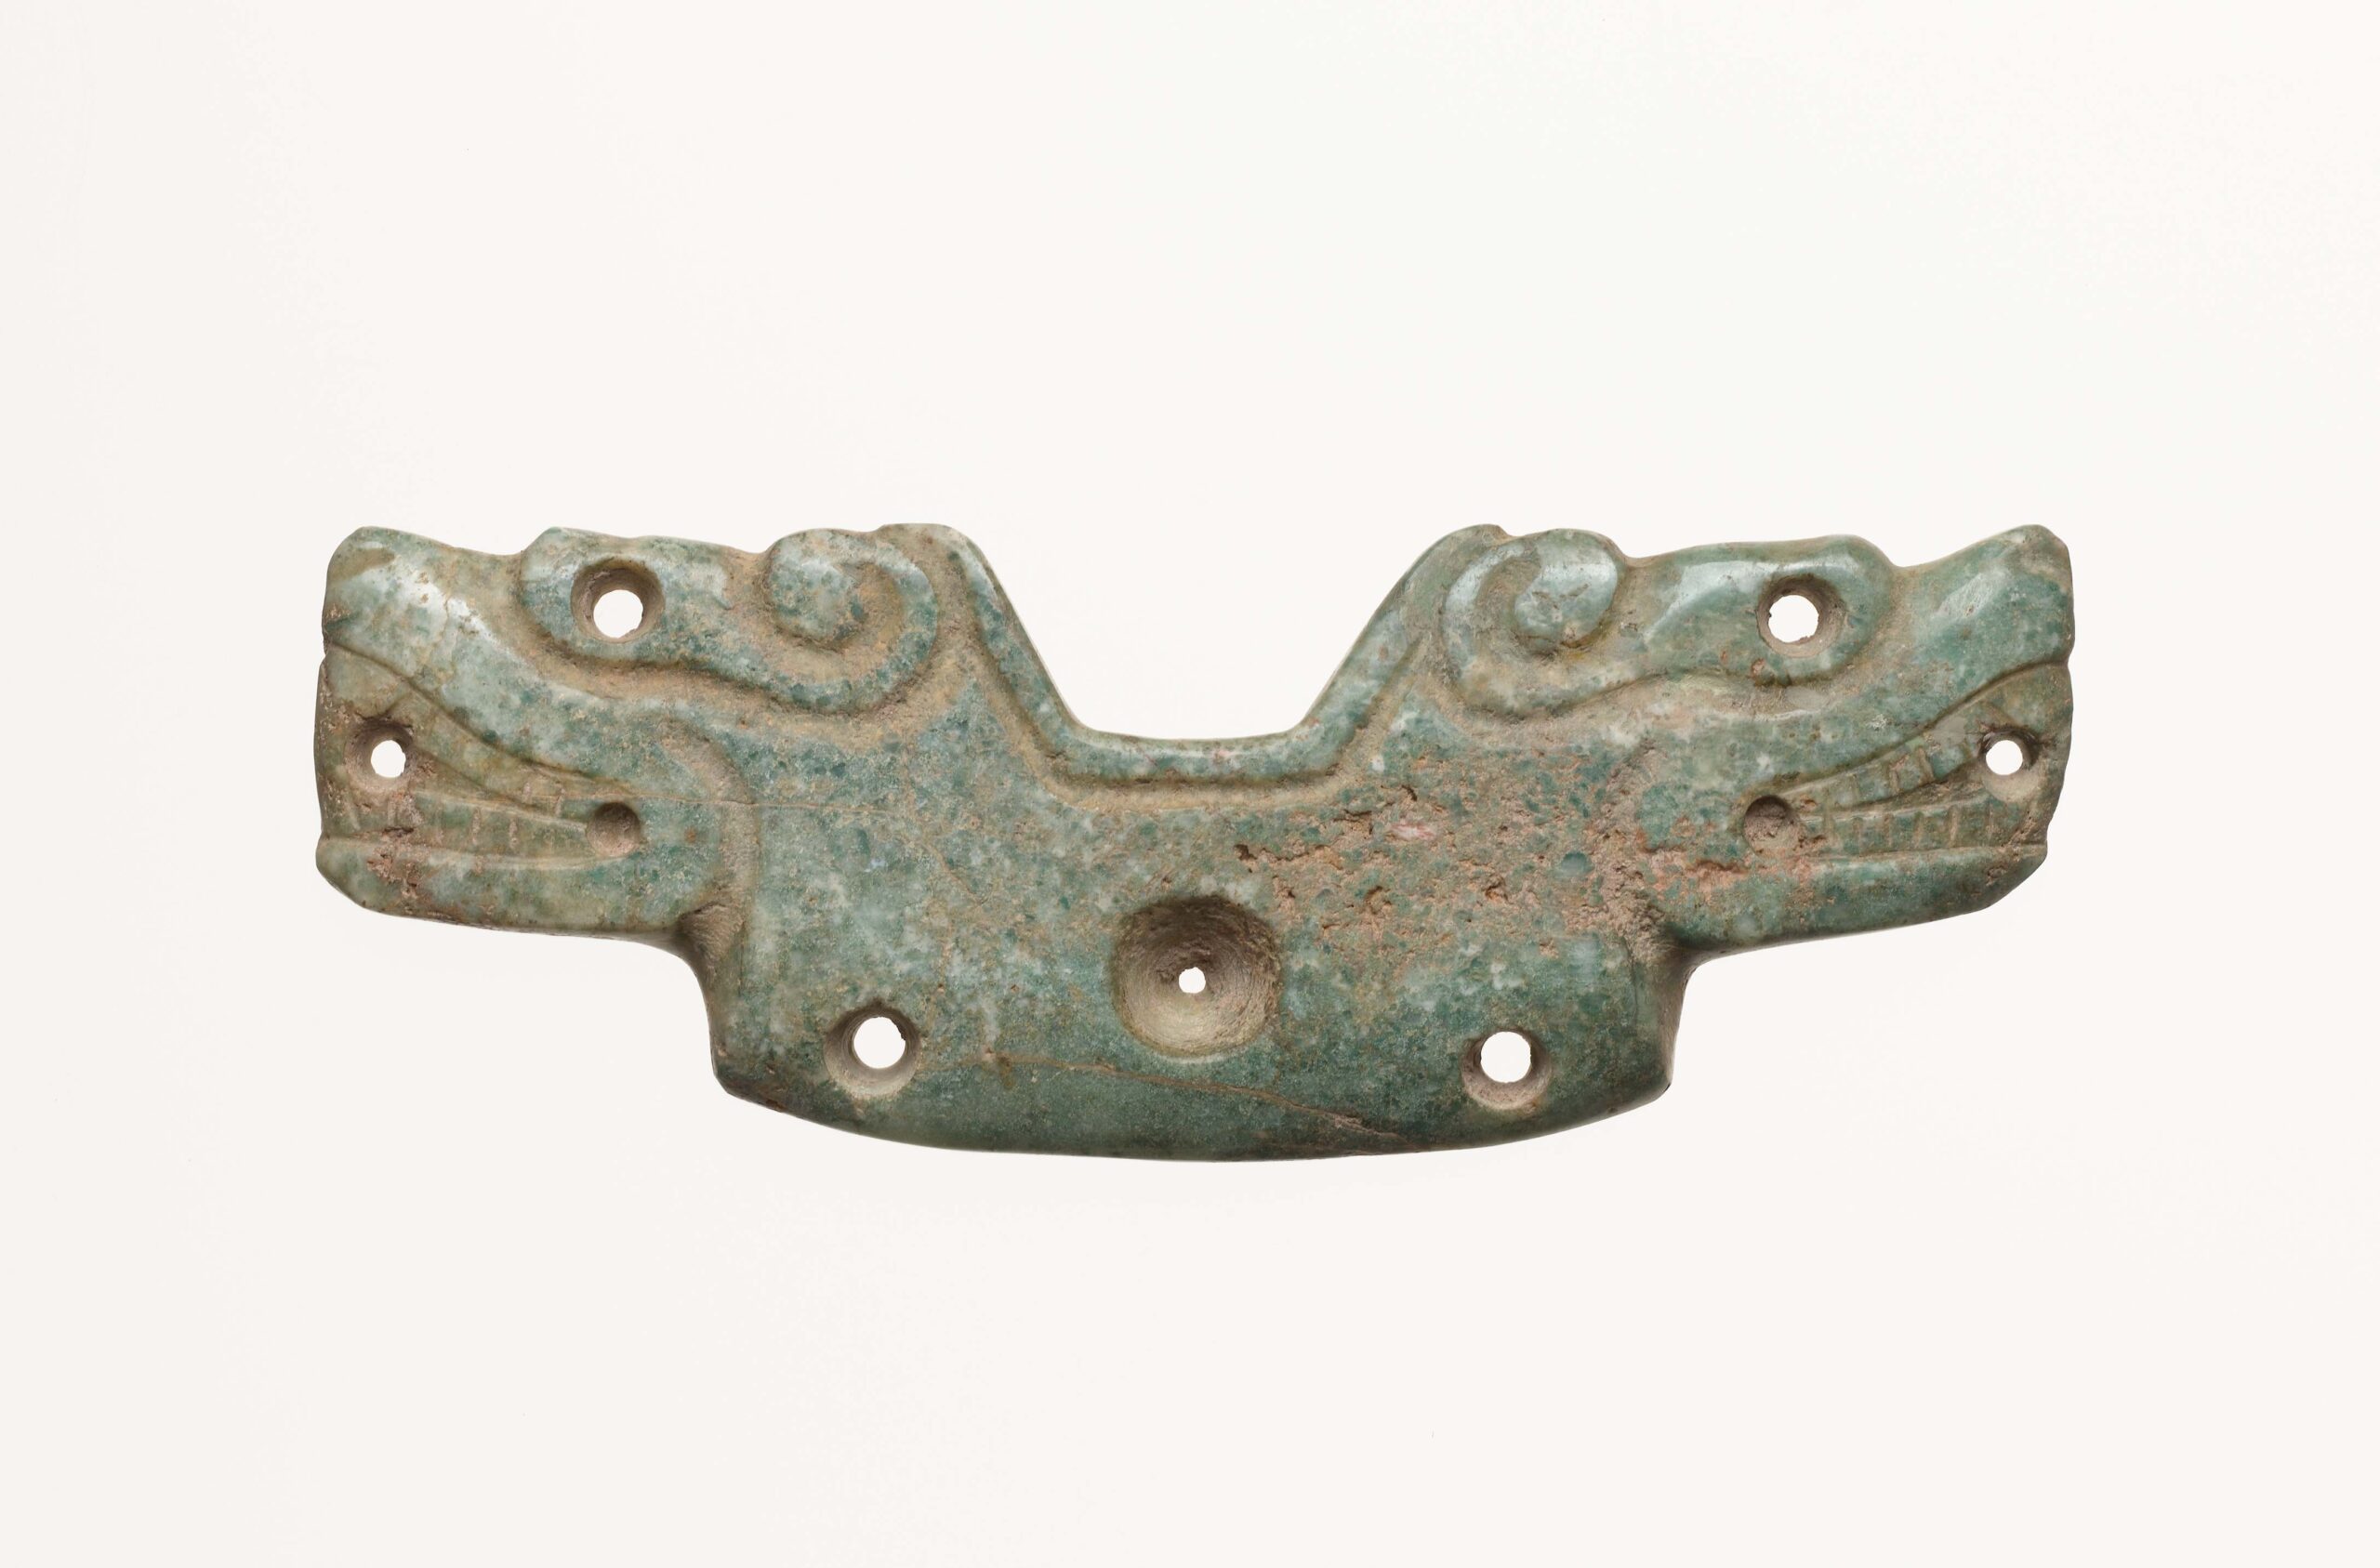 Pendant carved with two stylized alligators' heads facing away from each other.